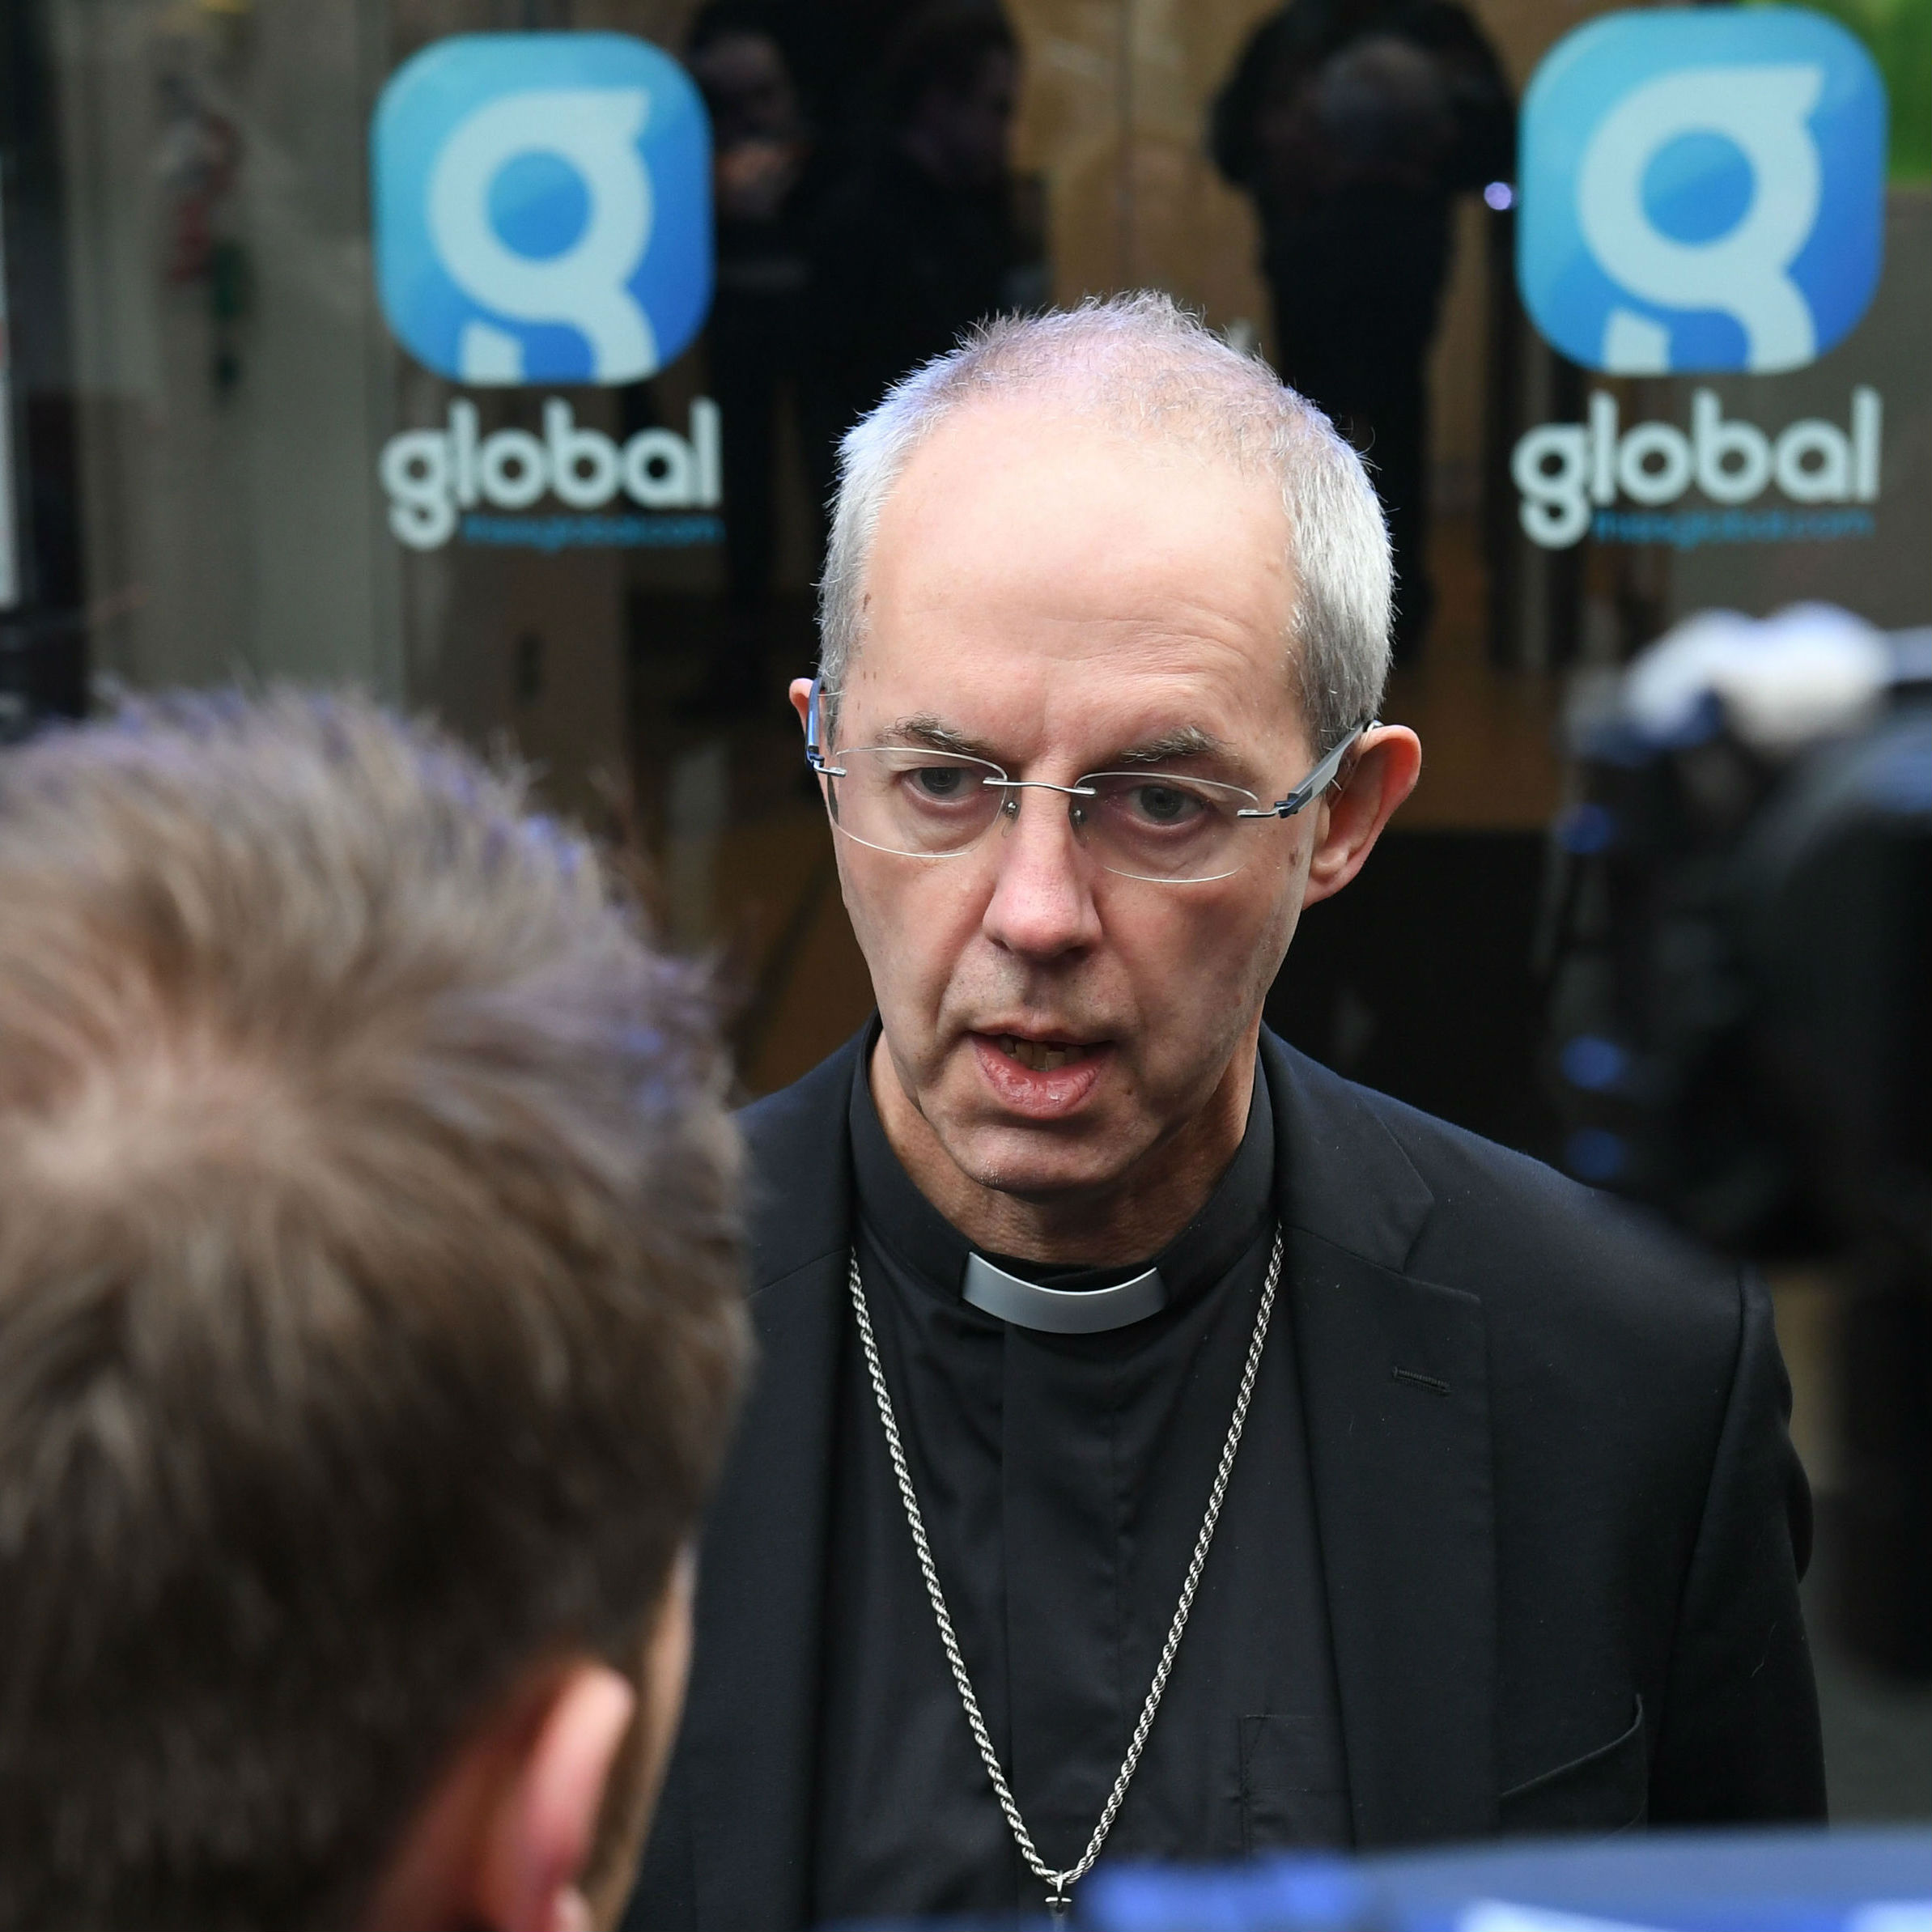 Church of England 'failed terribly' for not reporting abuse case says Archbishop of Canterbury 